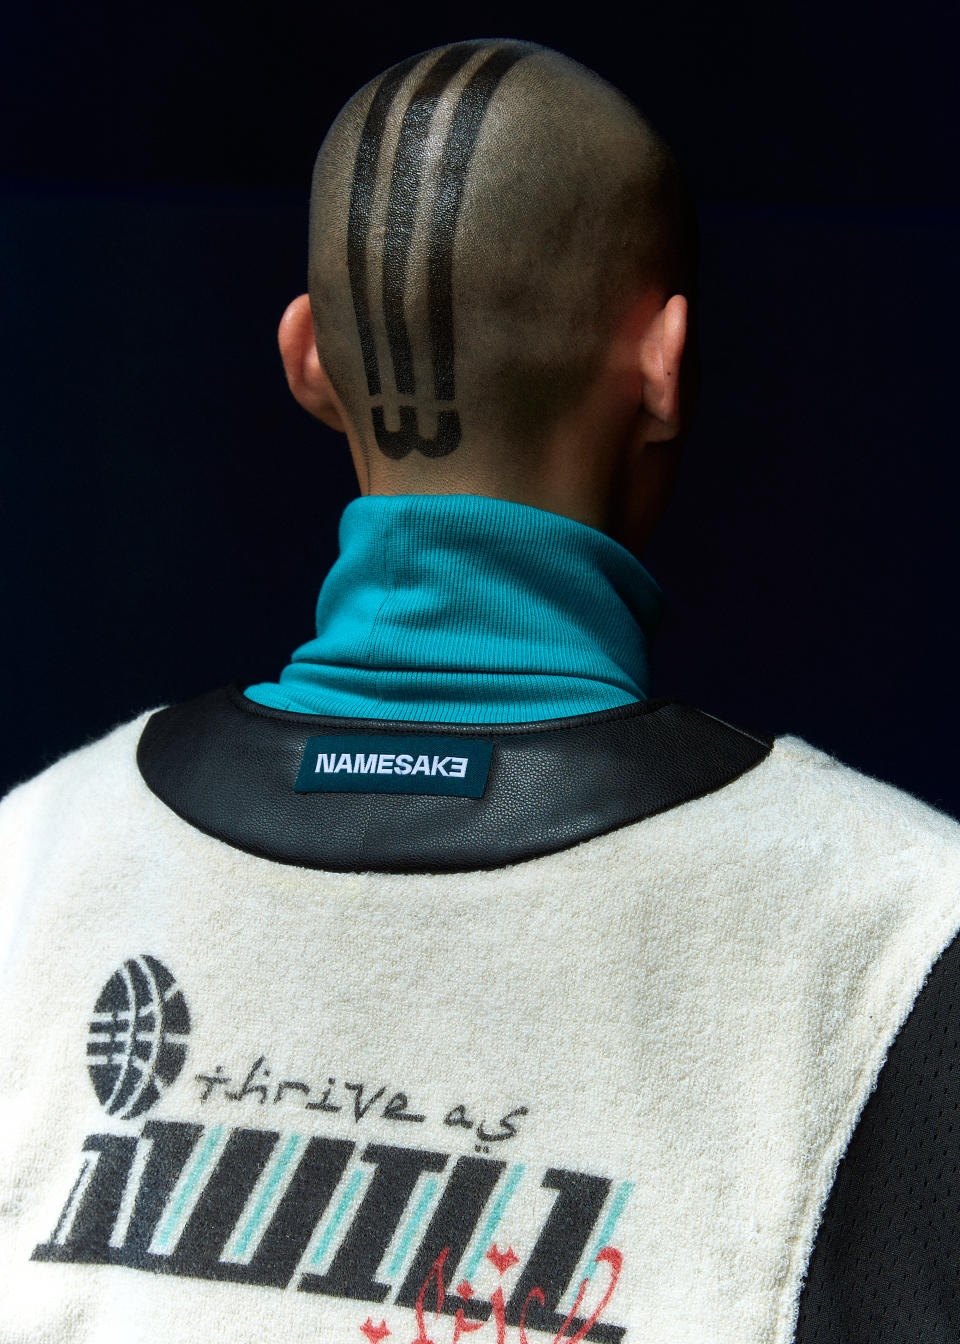 A preview from Namesake’s fall 2022 collection. - Credit: Alien Wang/Courtesy of Namesake